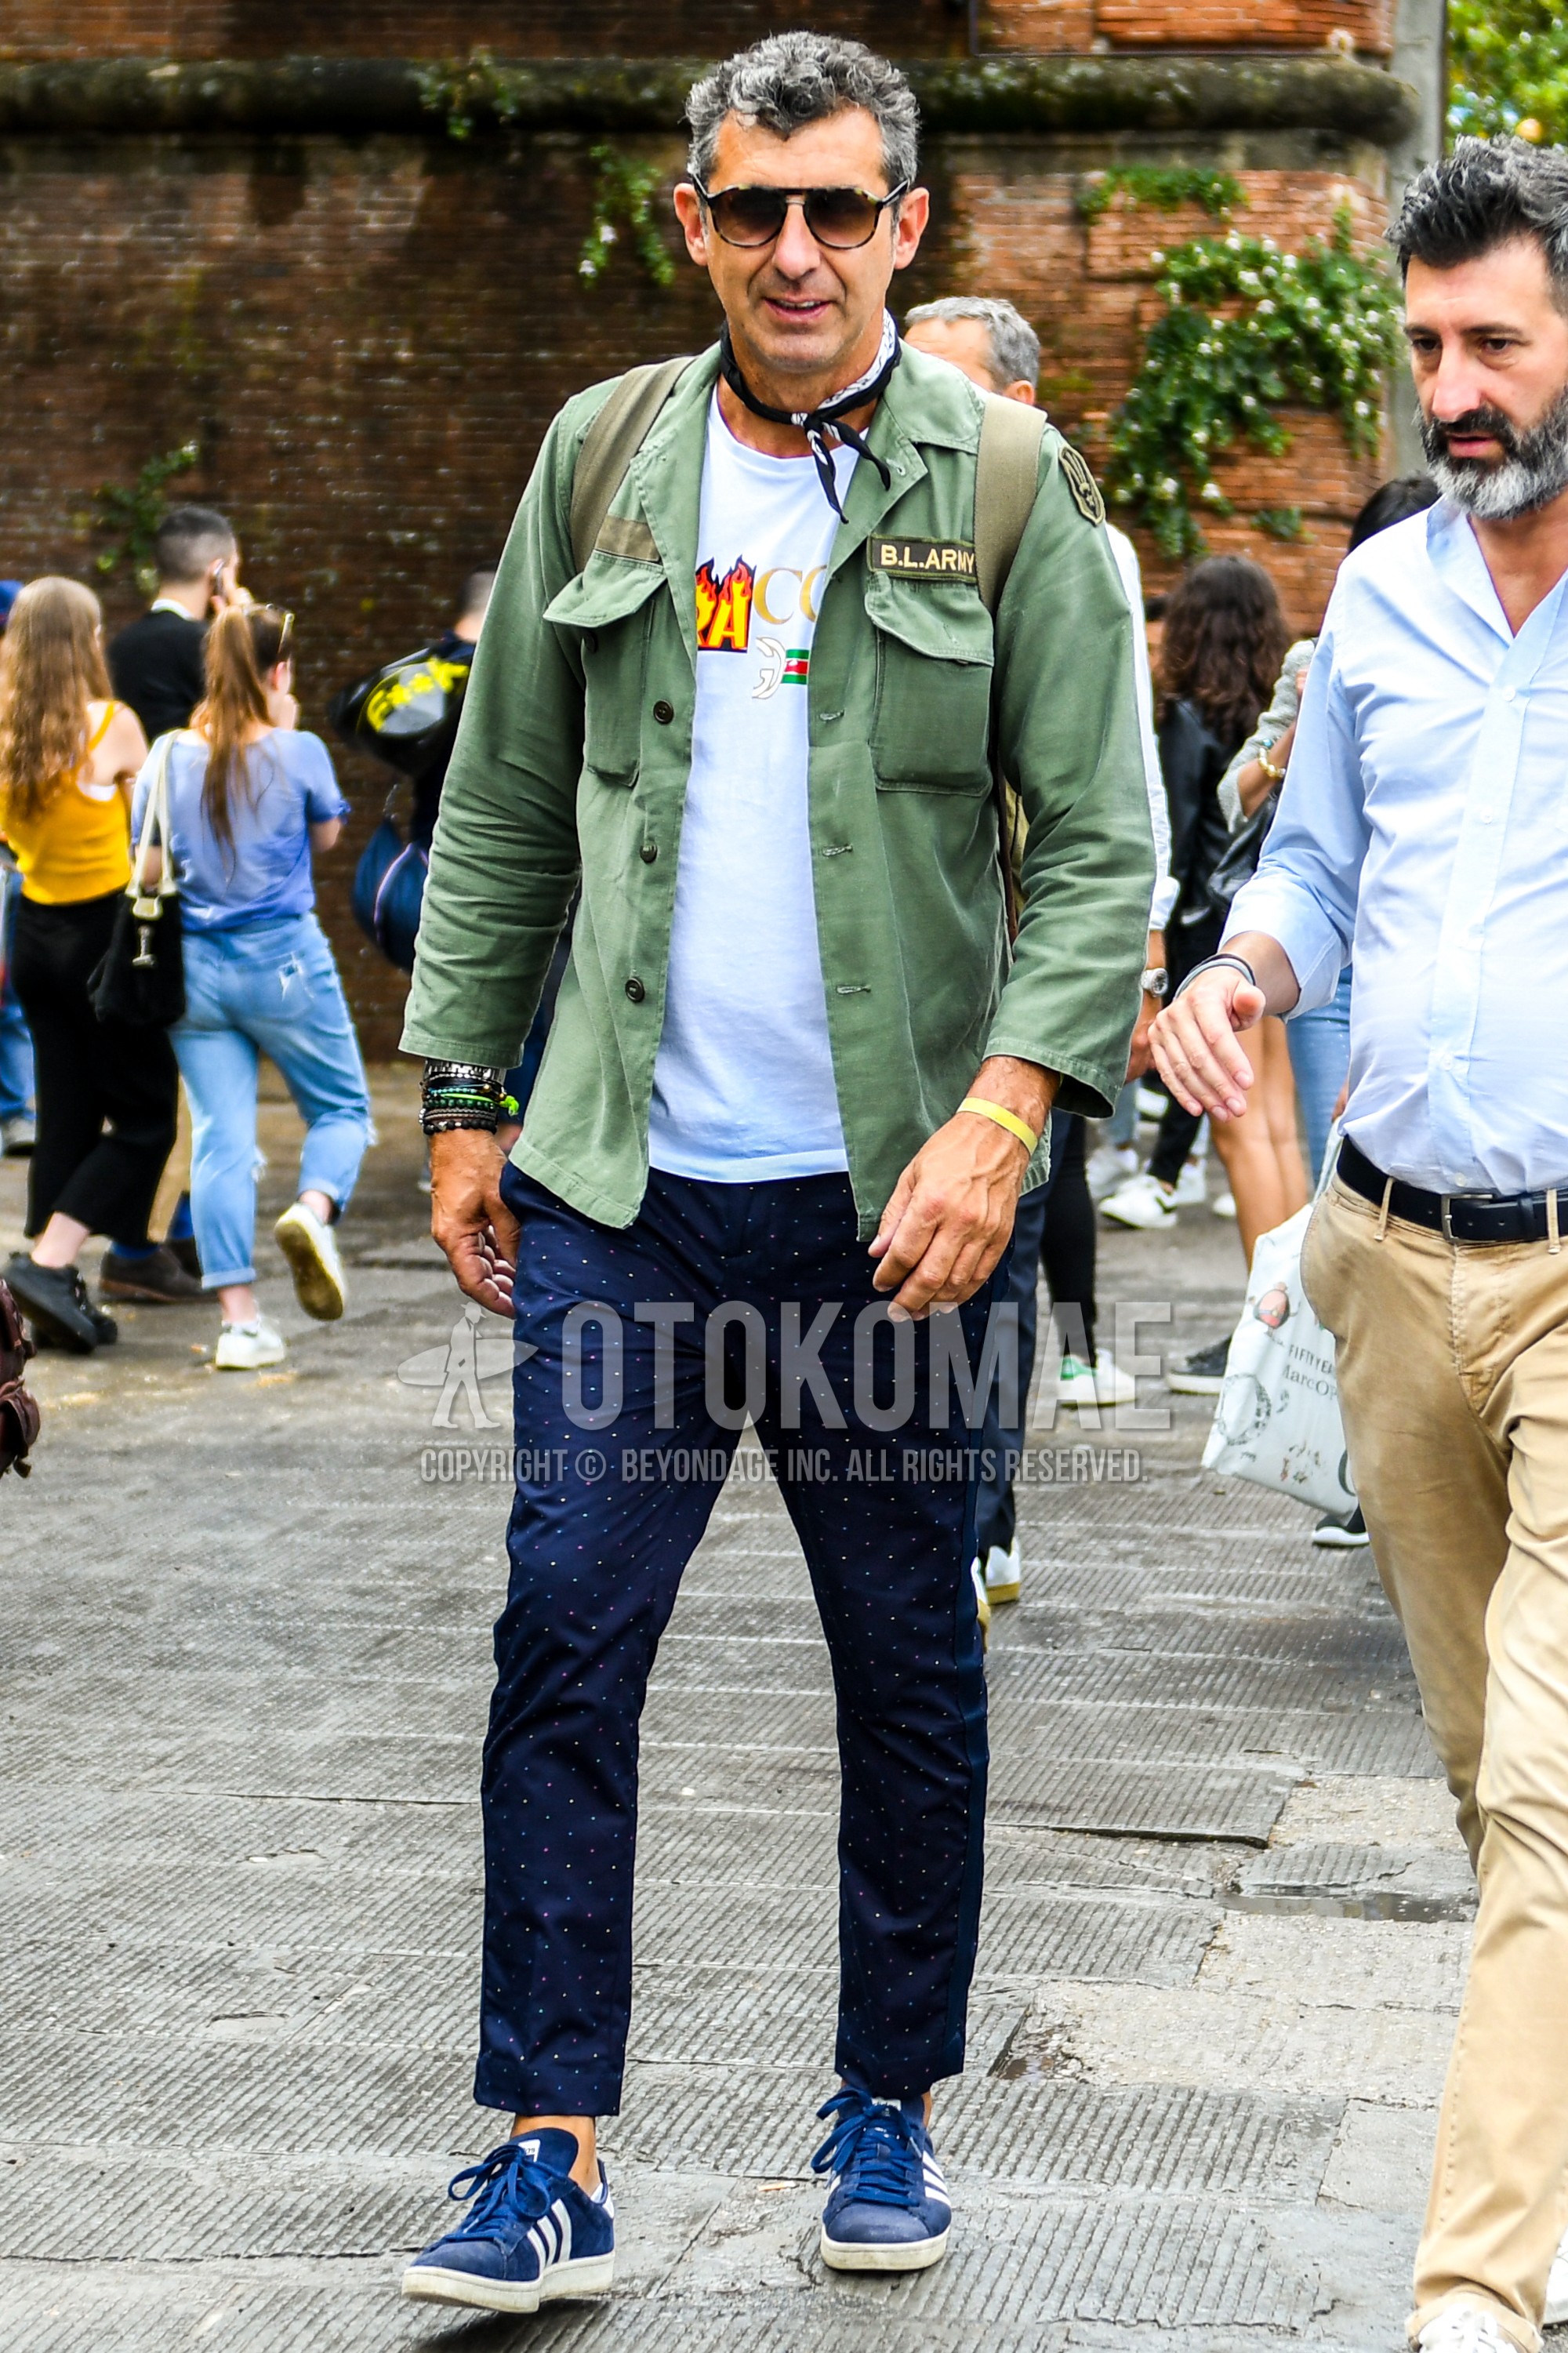 Men's spring summer autumn outfit with beige tortoiseshell sunglasses, black paisley bandana/neckerchief, olive green plain shirt jacket, white graphic t-shirt, navy dots chinos, blue low-cut sneakers.